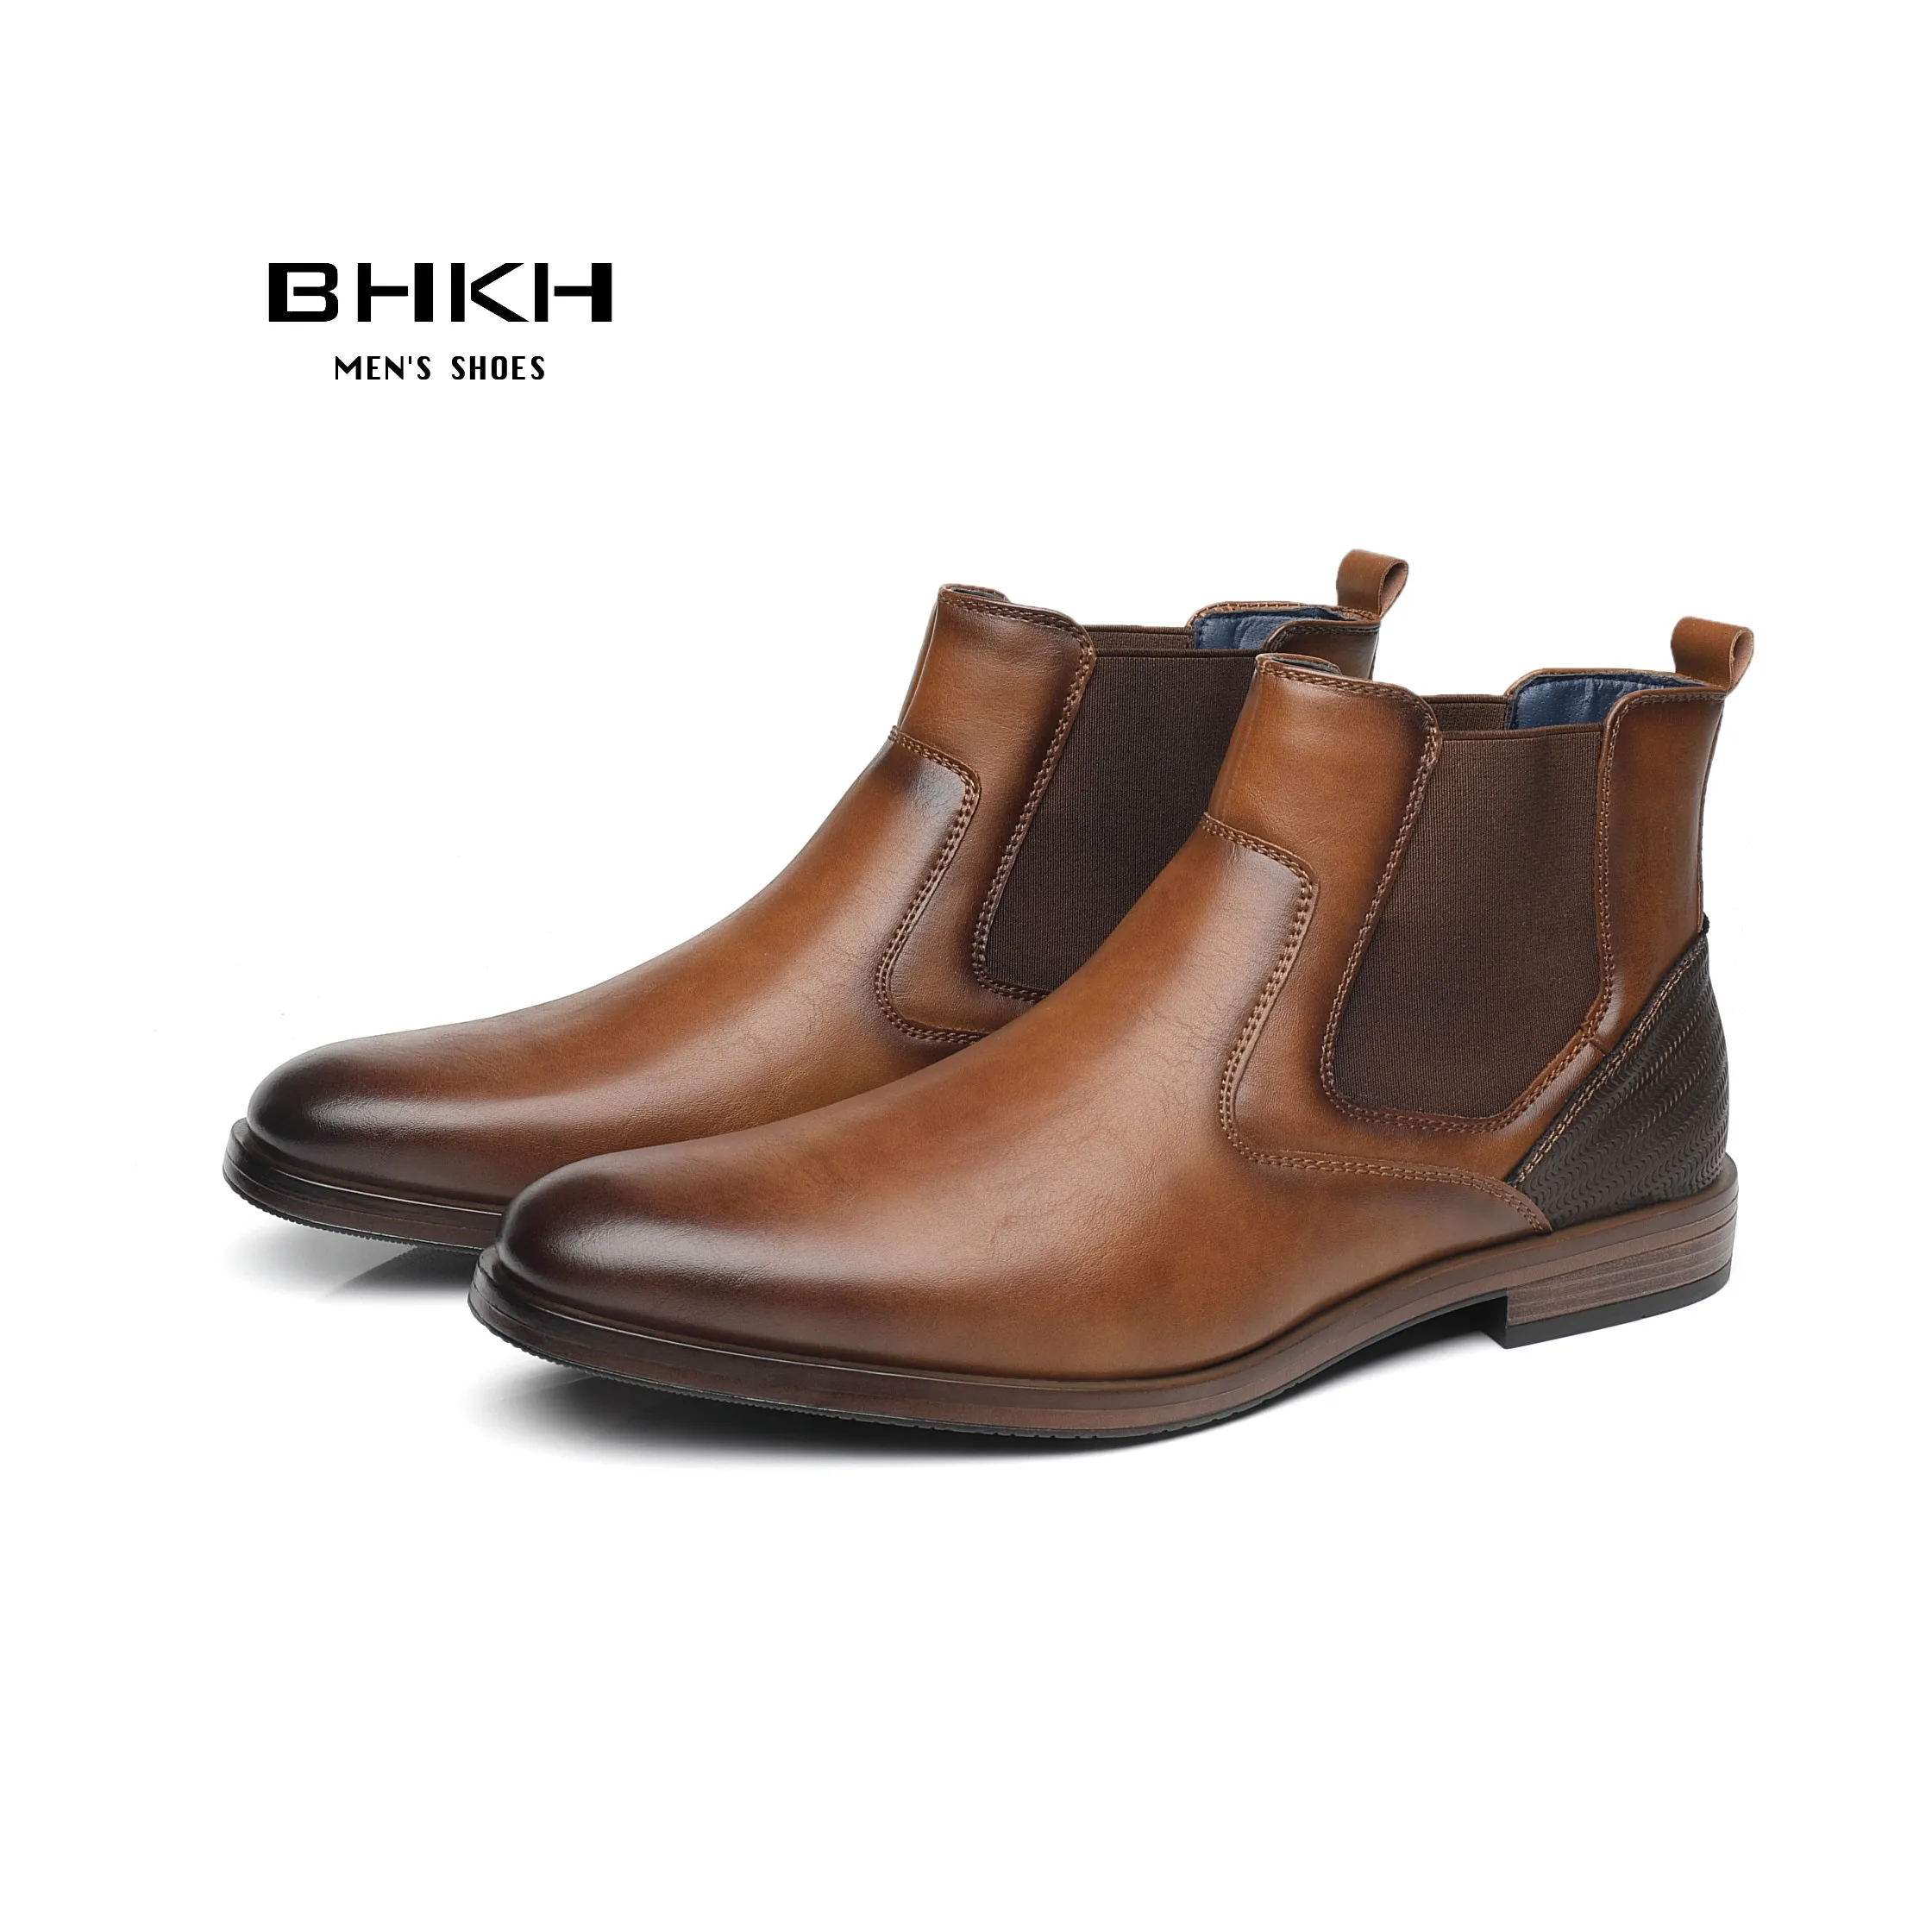 

BHKH 2021 Men Chelsea Boots New Winter Men Boots Soft Leather Elastic Strap Ankle Boots Smart Formal Business Dress shoes Man S